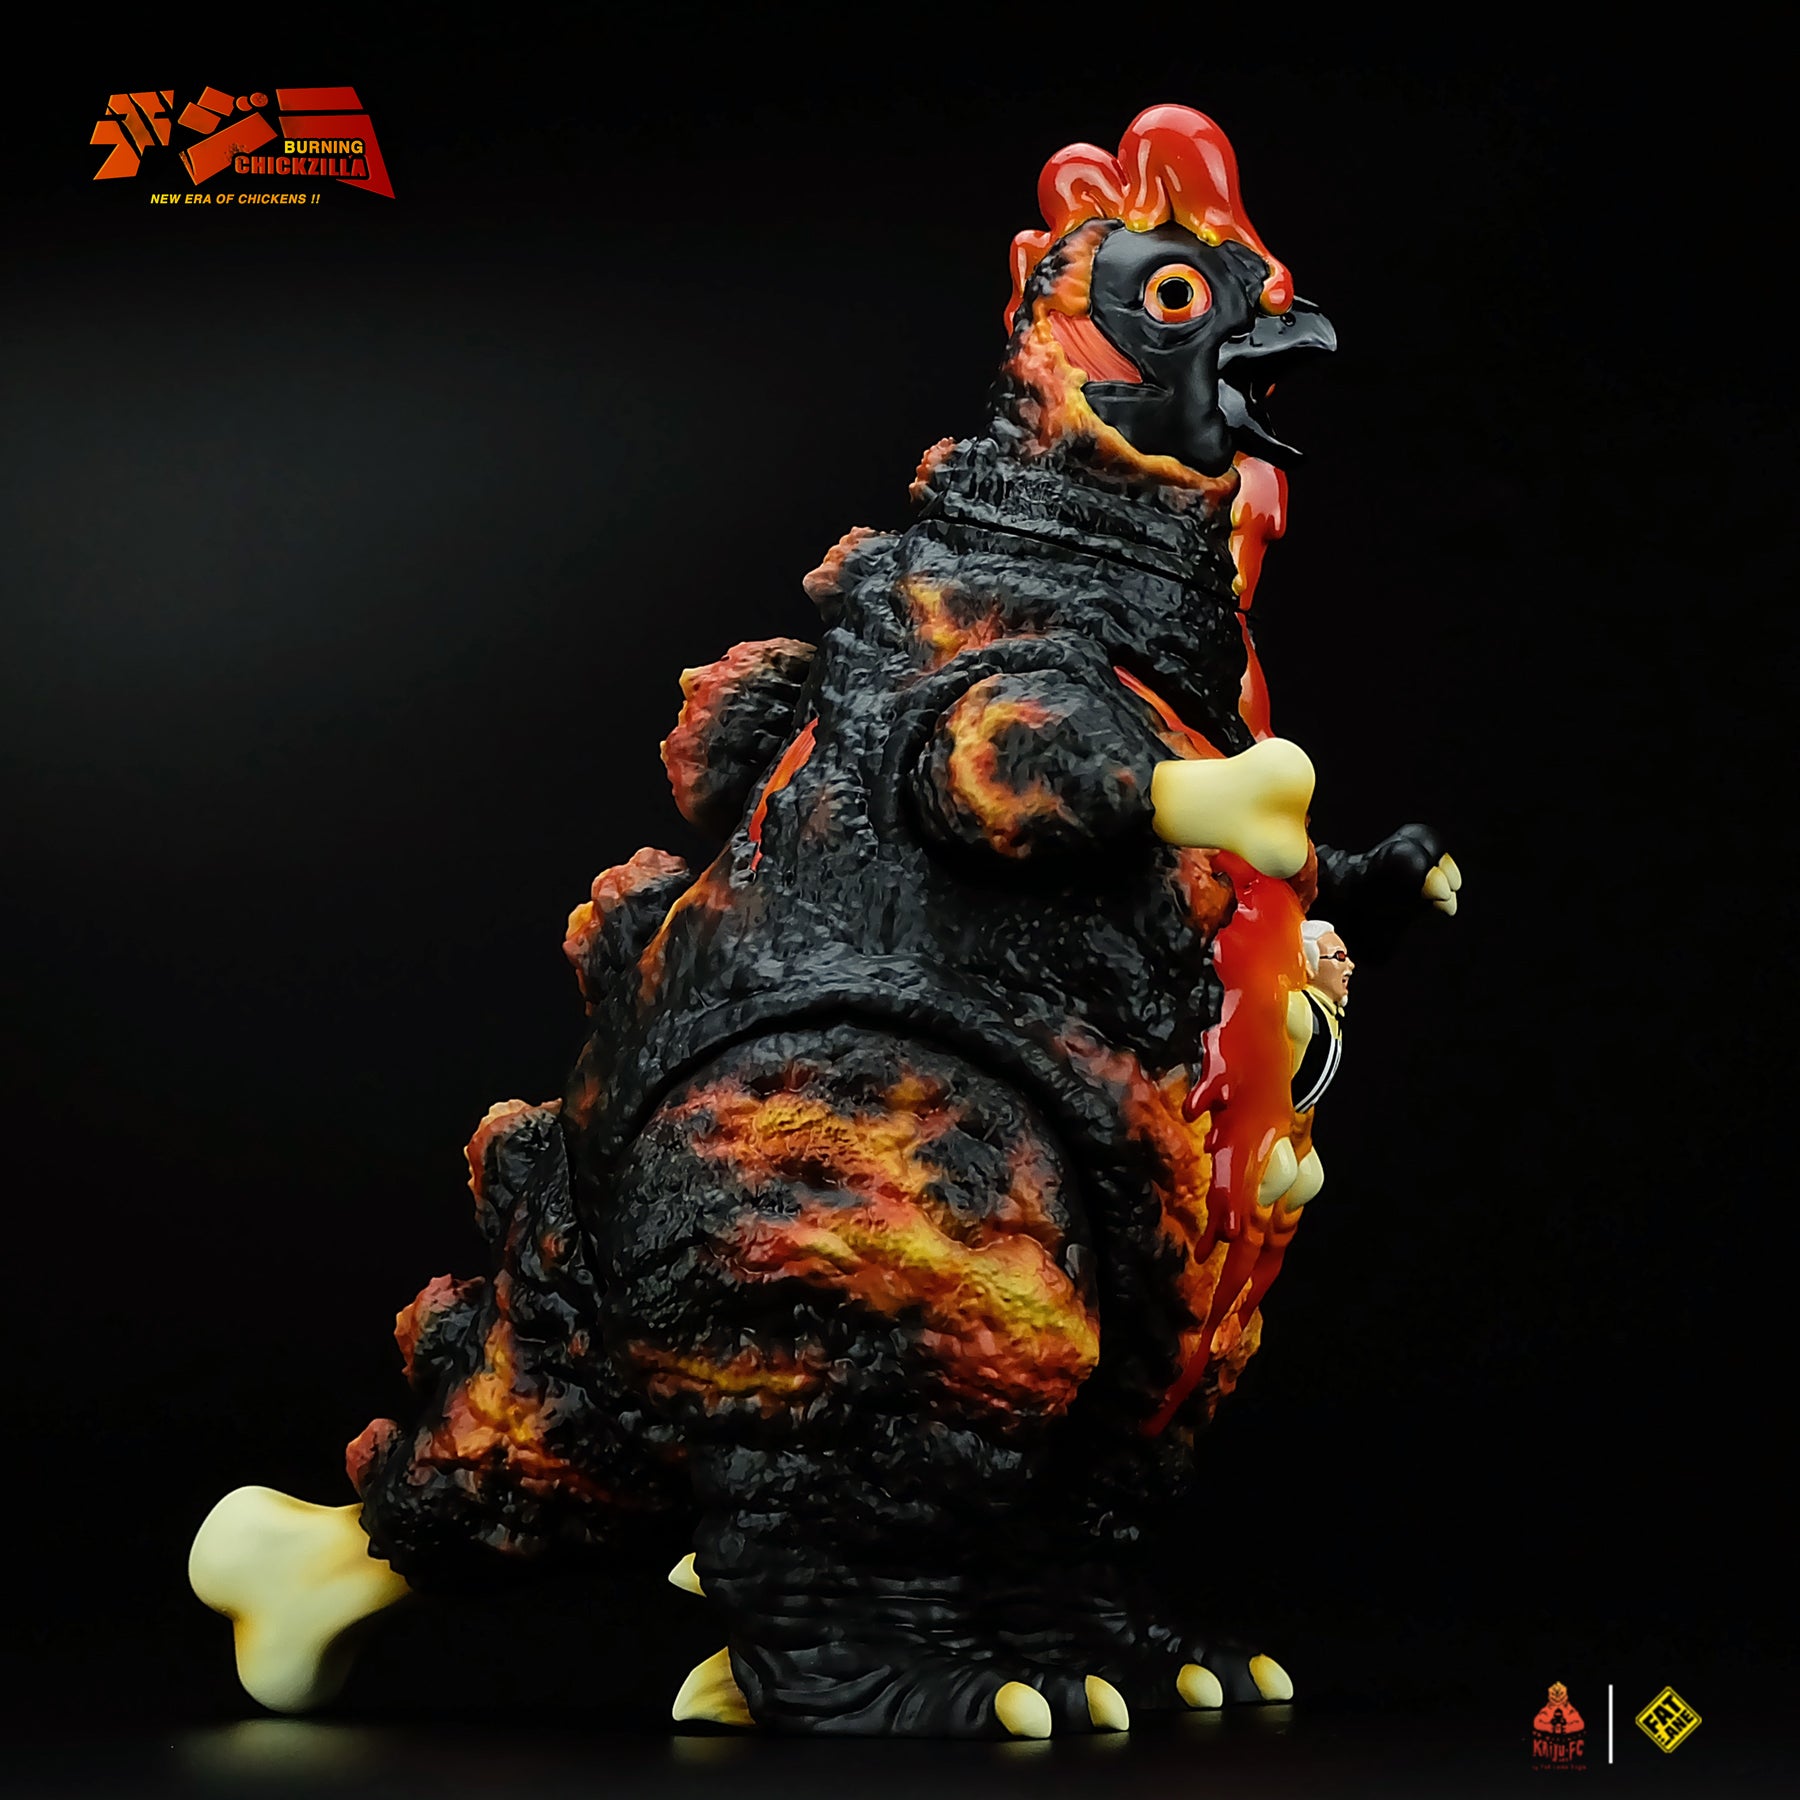 The ChickZilla (Burning Ver.) by Fat Lane